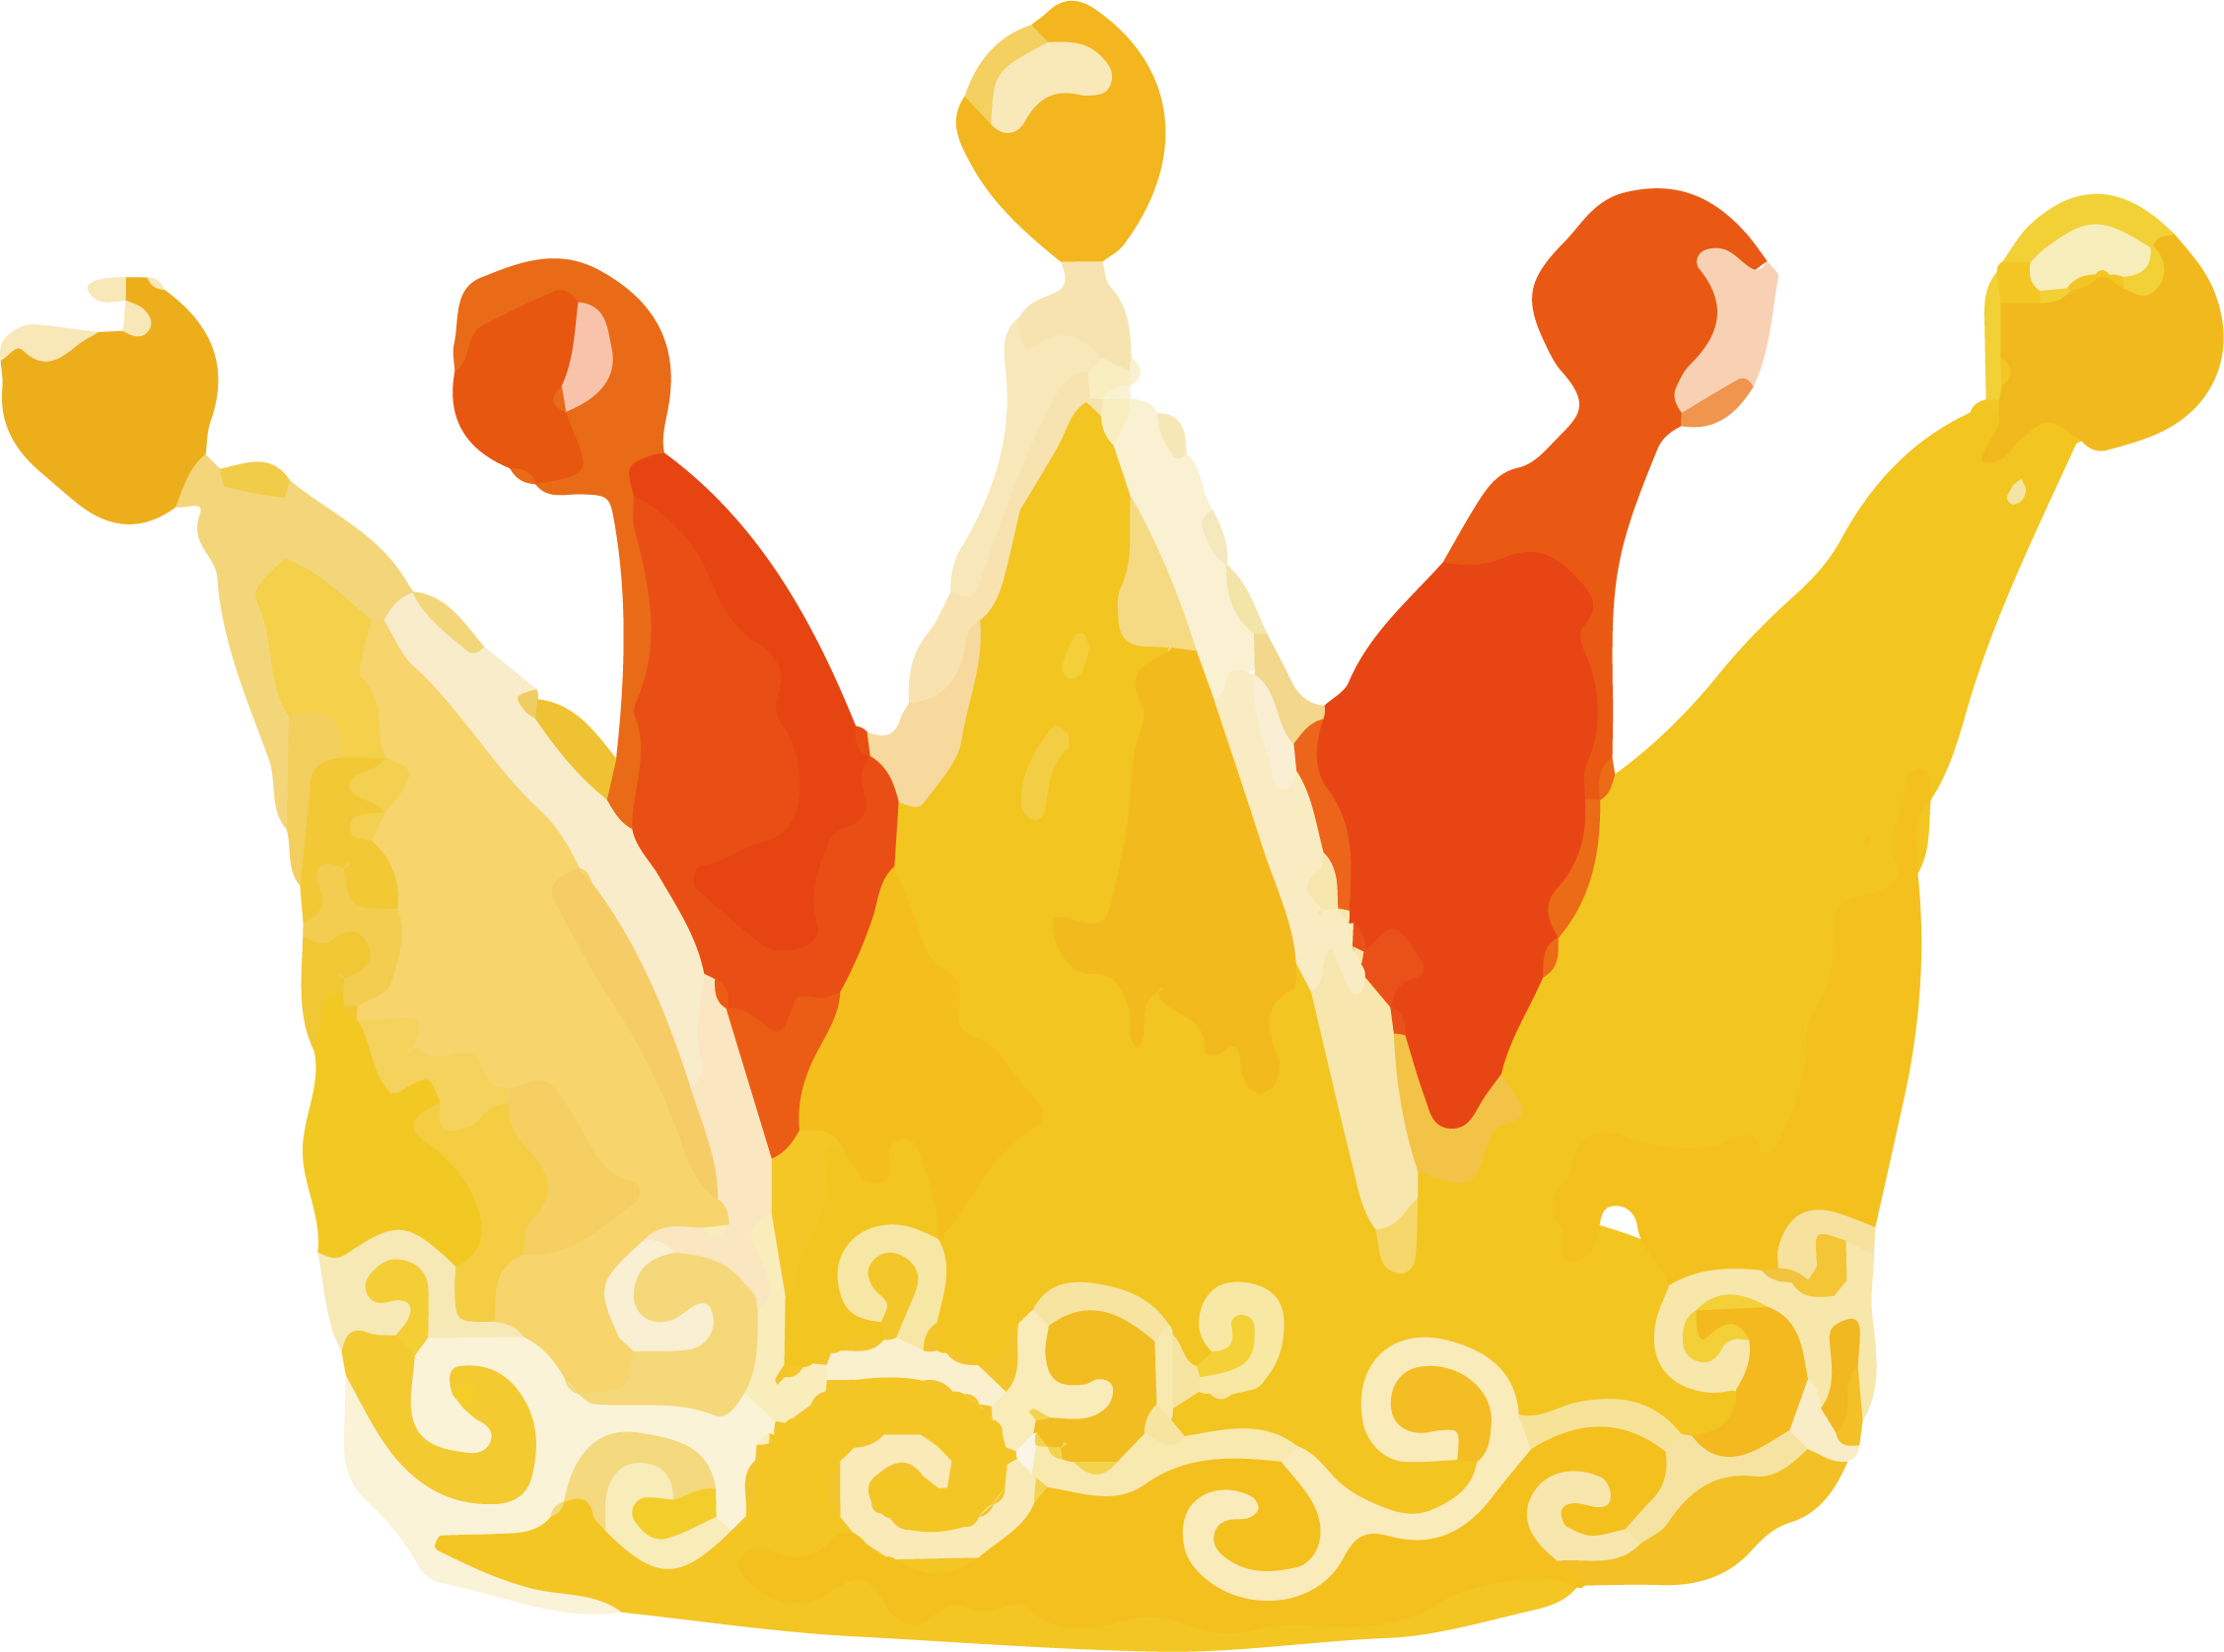 fairytale clipart yellow crown